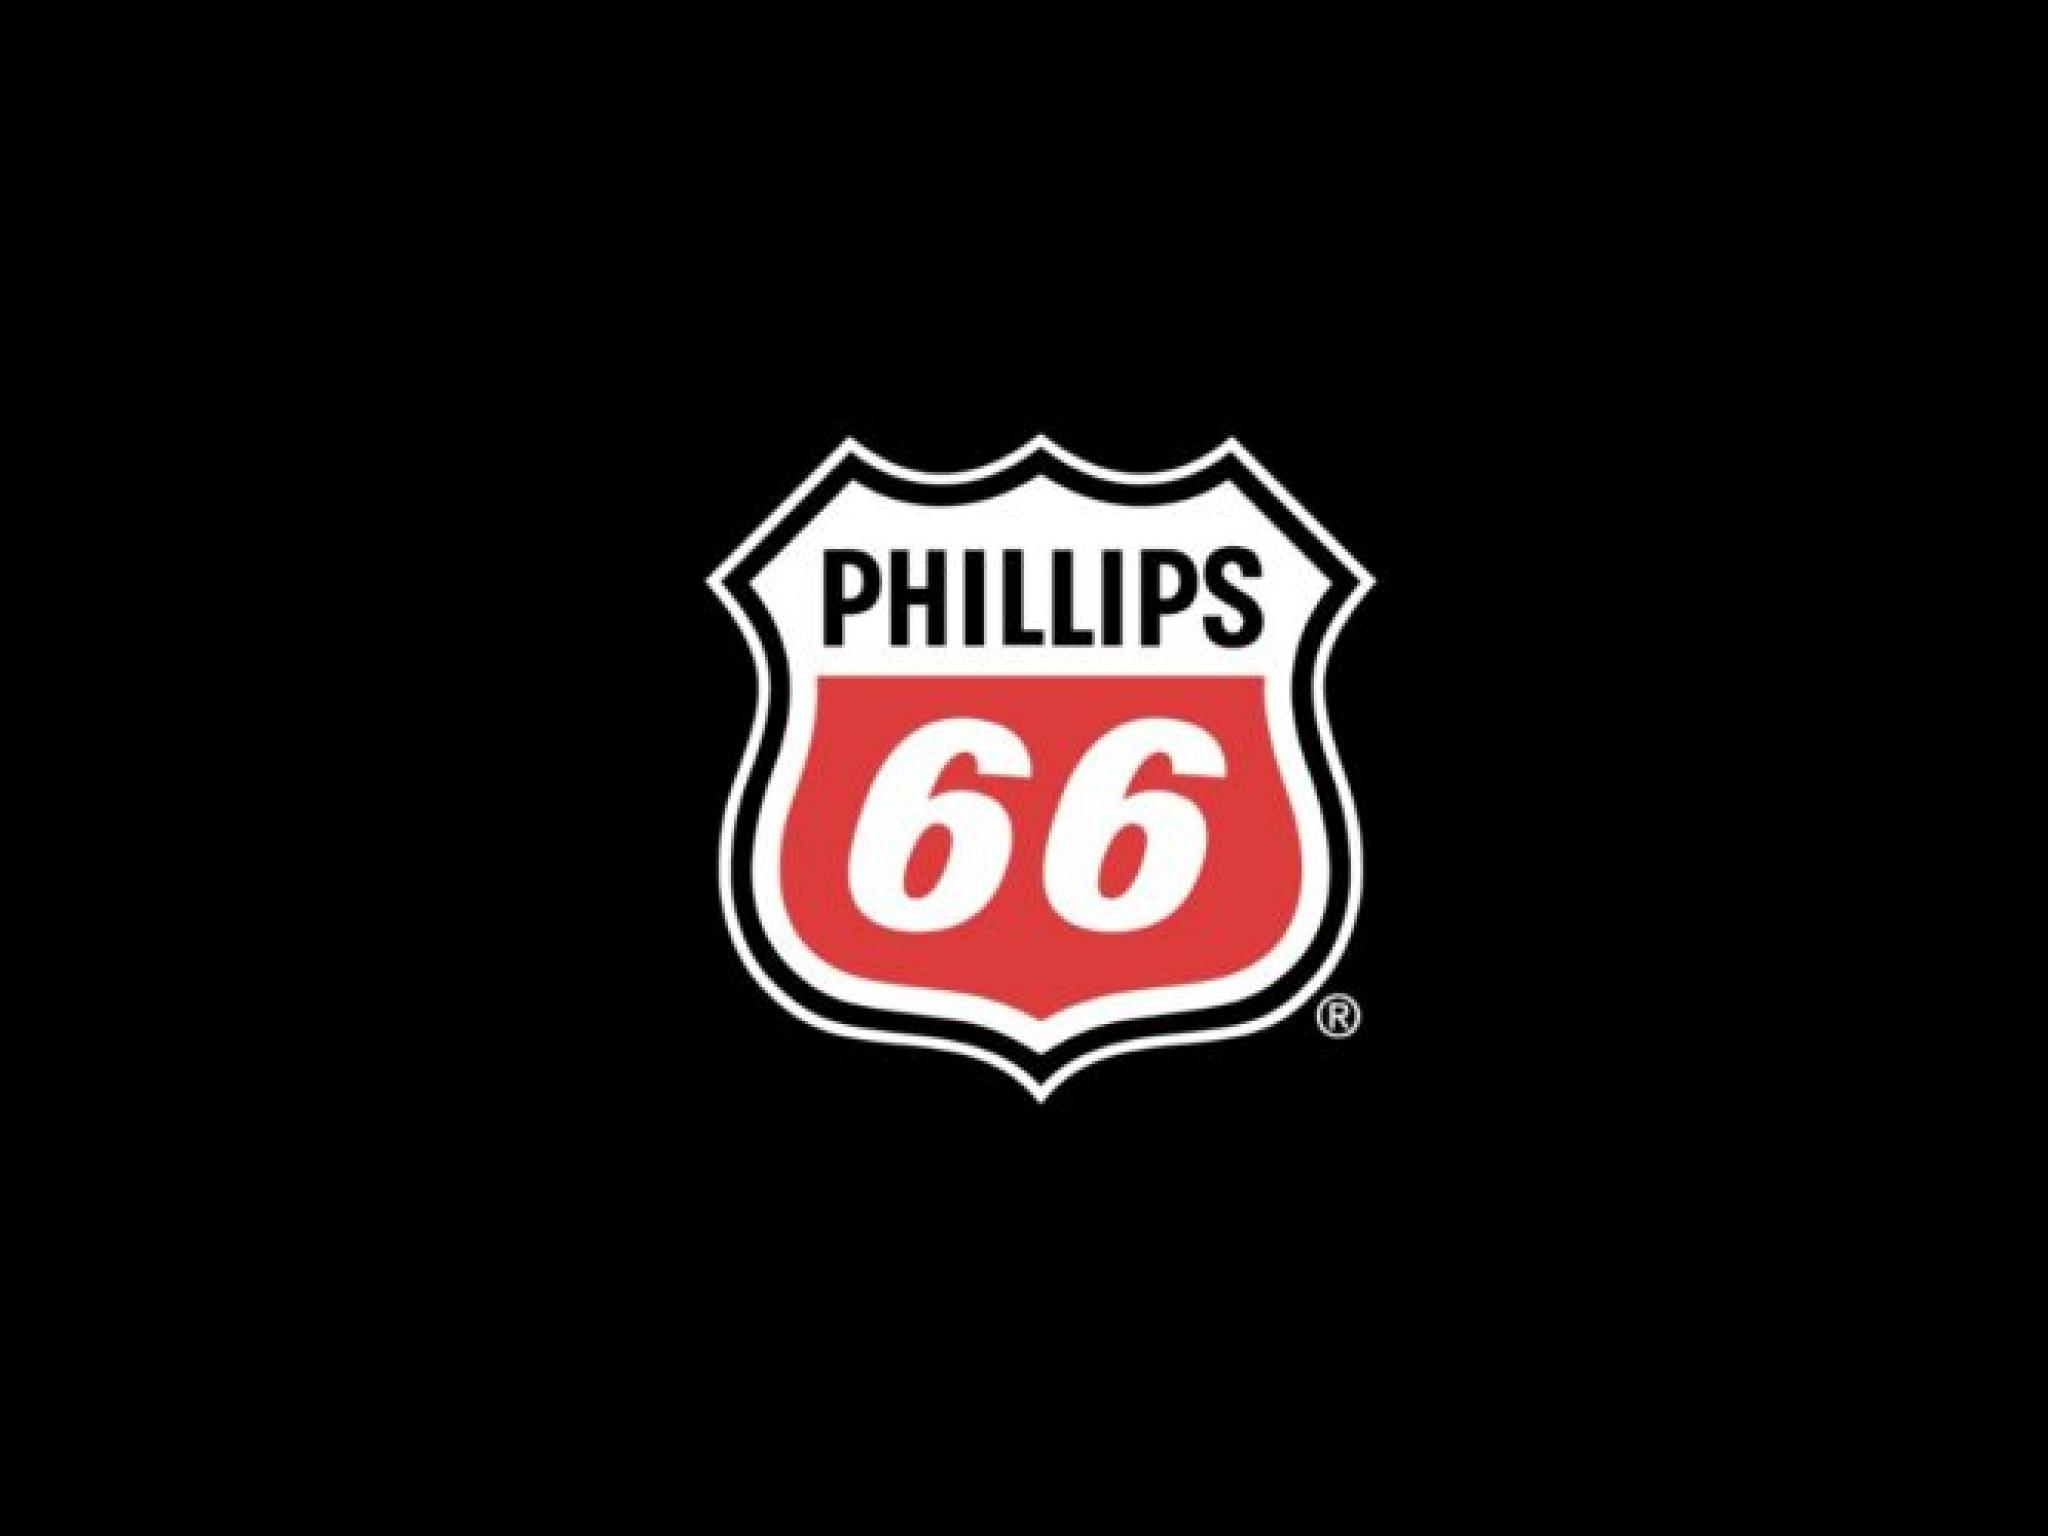  phillips-66-gears-up-for-q1-print-these-most-accurate-analysts-revise-forecasts-ahead-of-earnings-call 